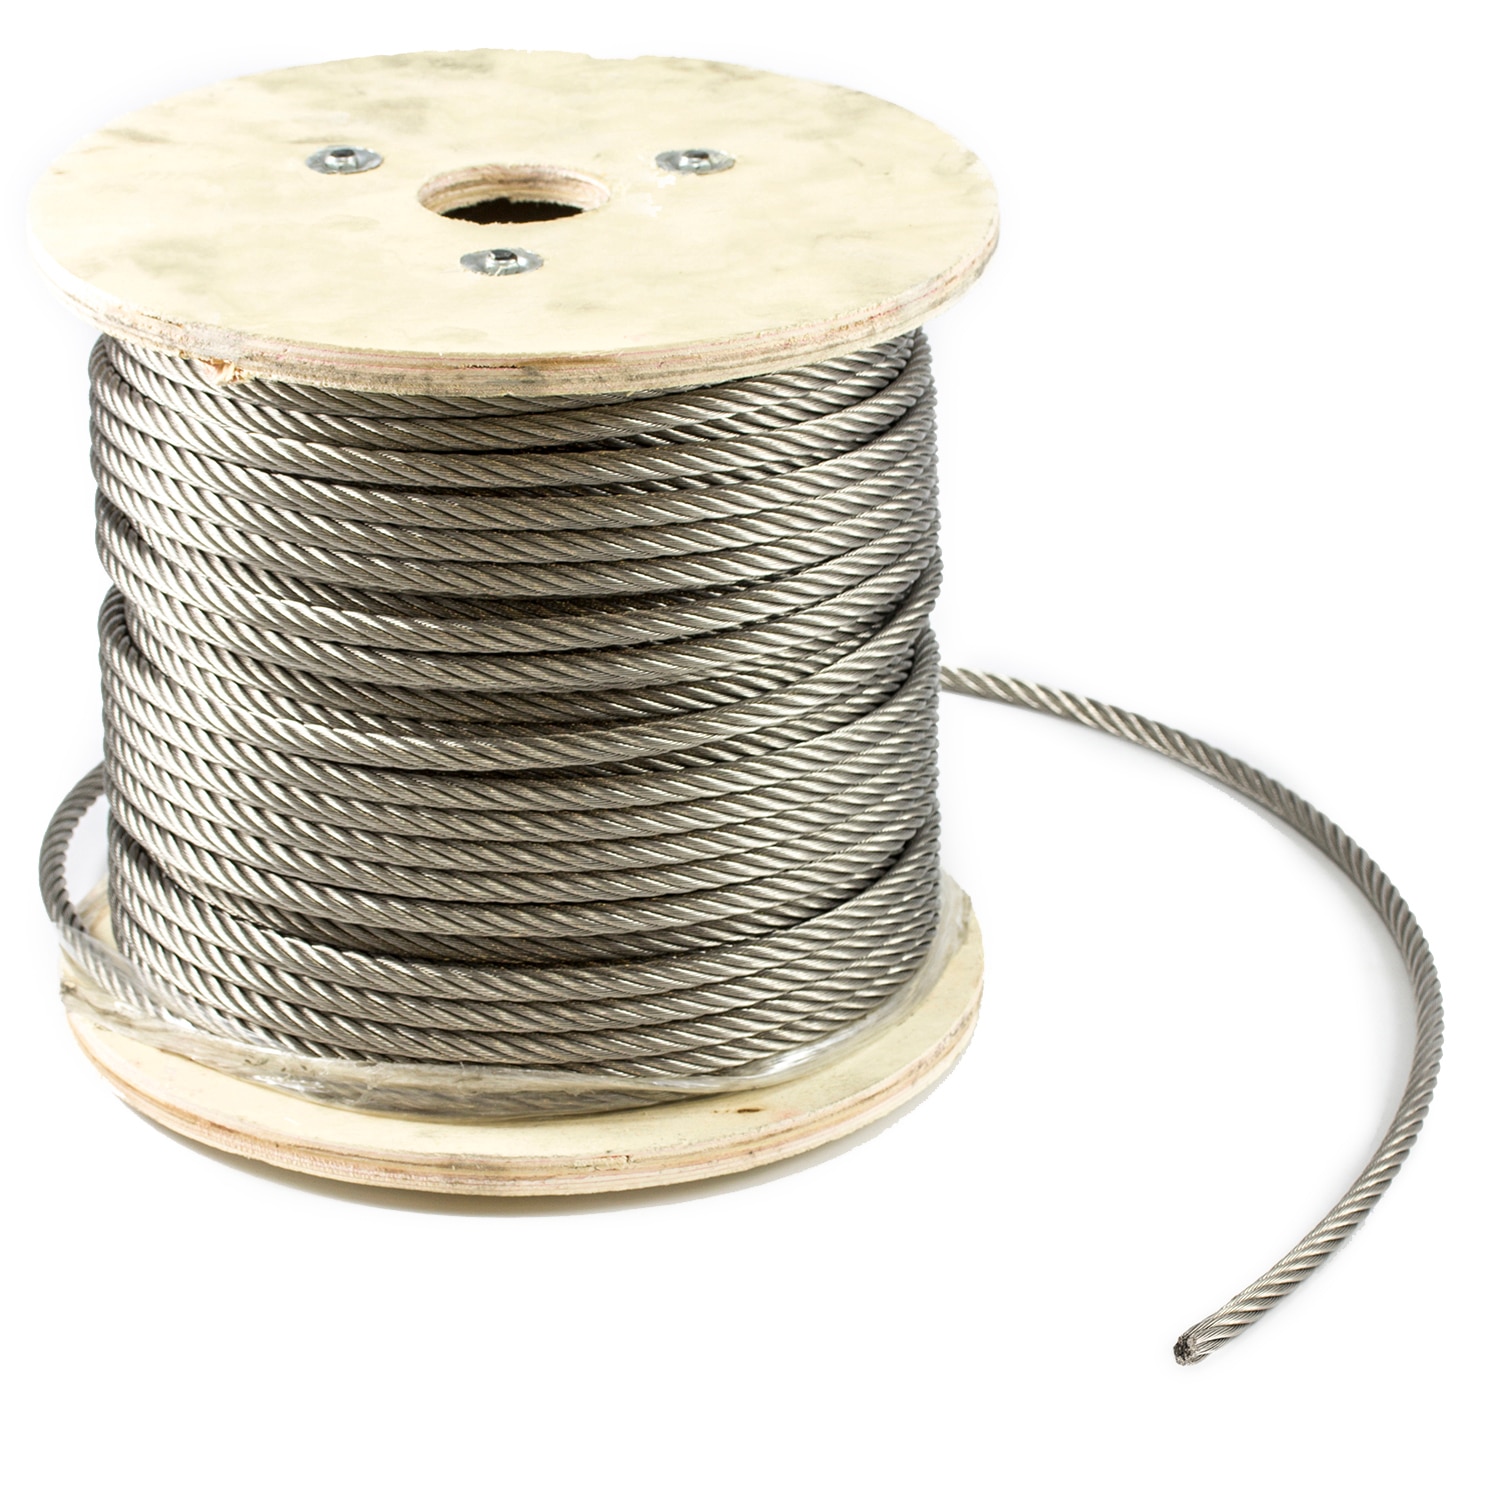 SolaMesh Wire Rope Stainless Steel Type 316 10mm (3/8